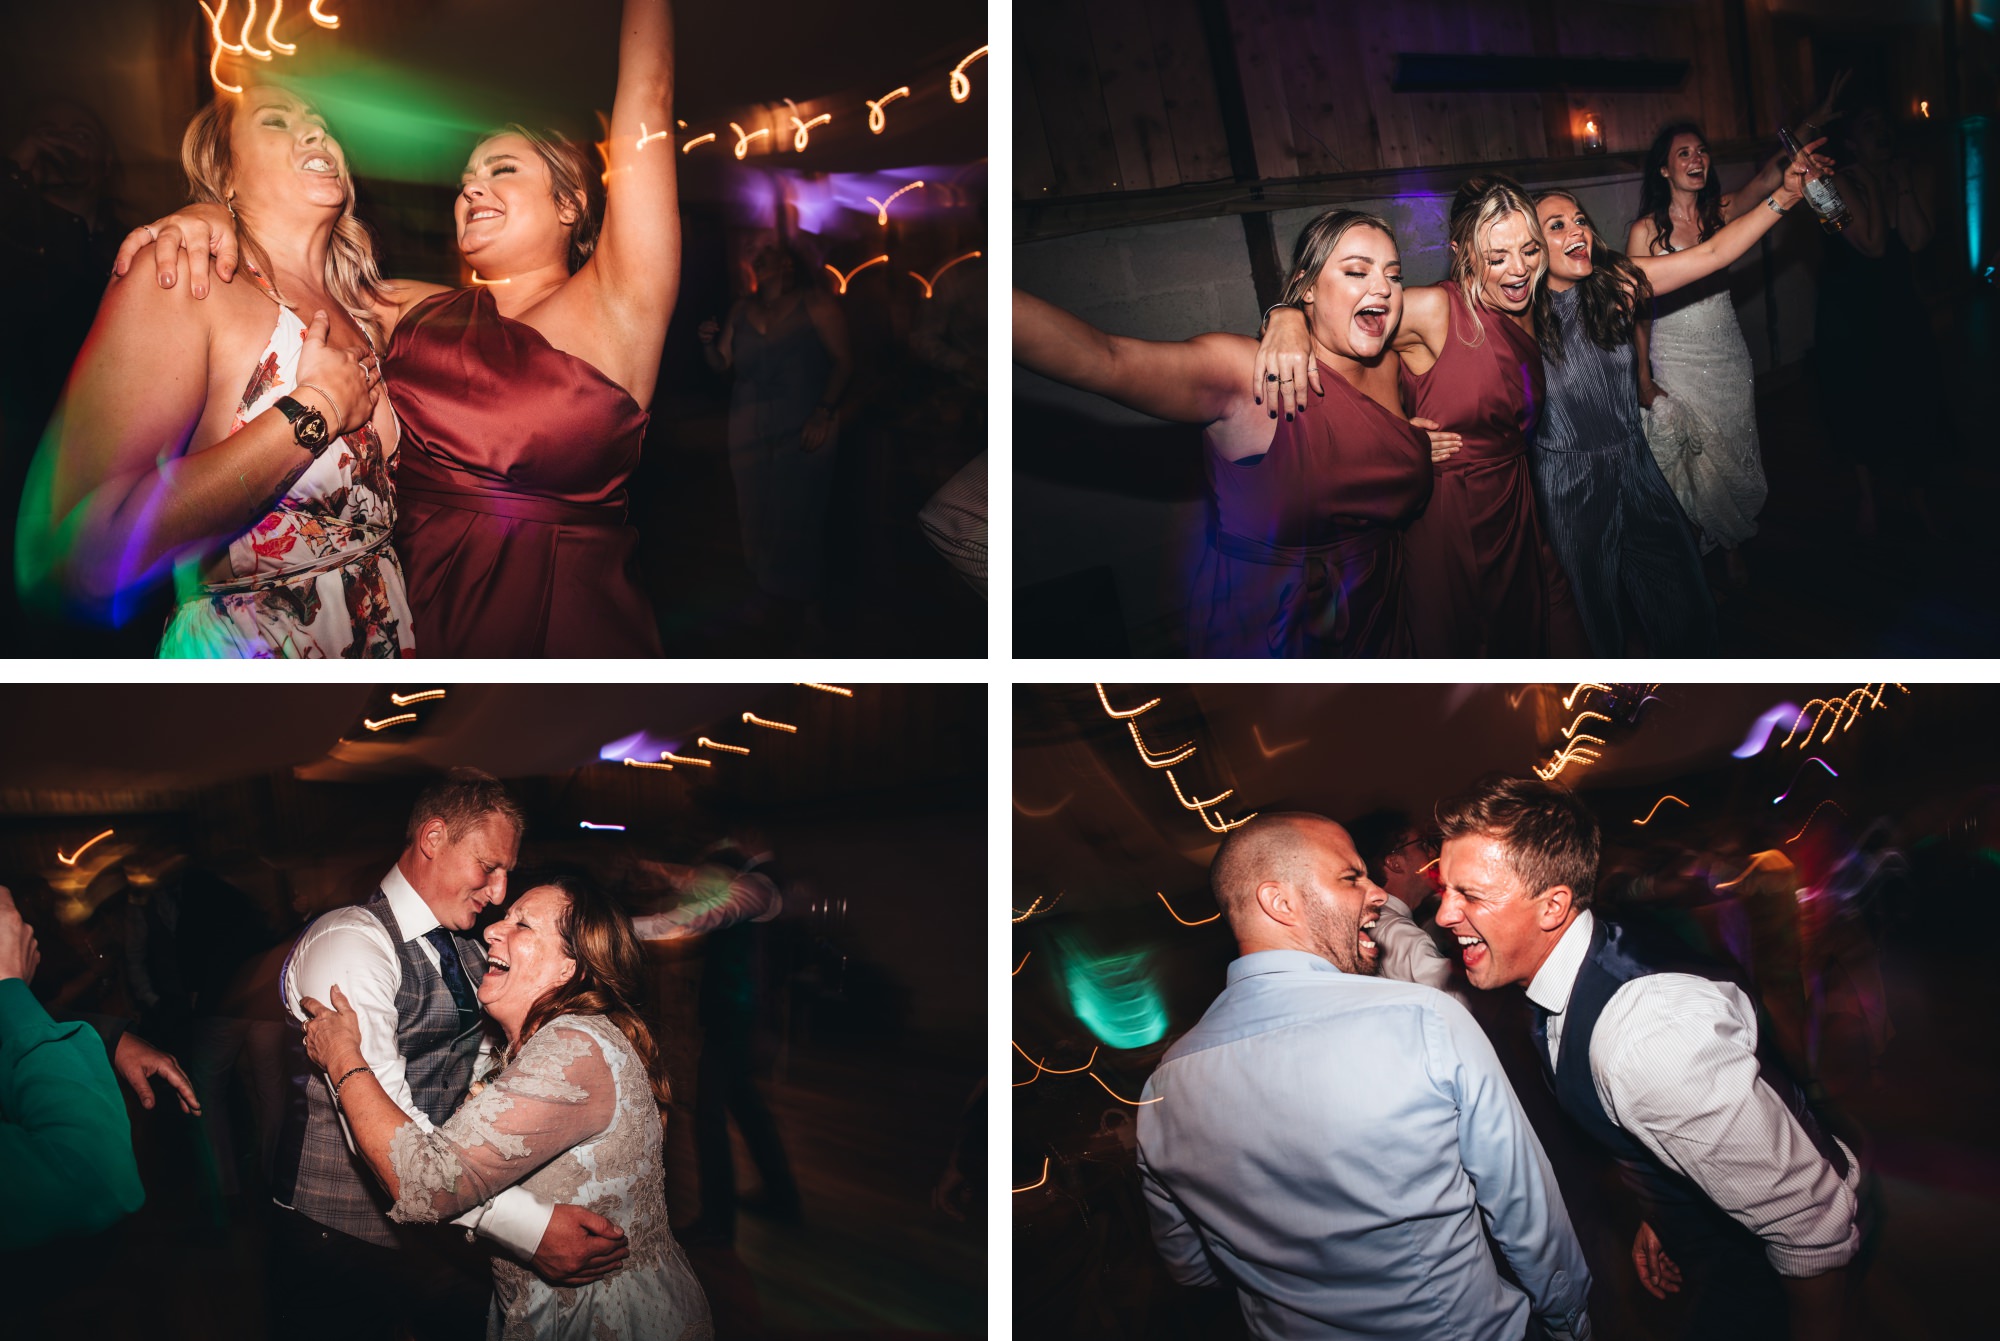 guest sing and dance at evening wedding reception